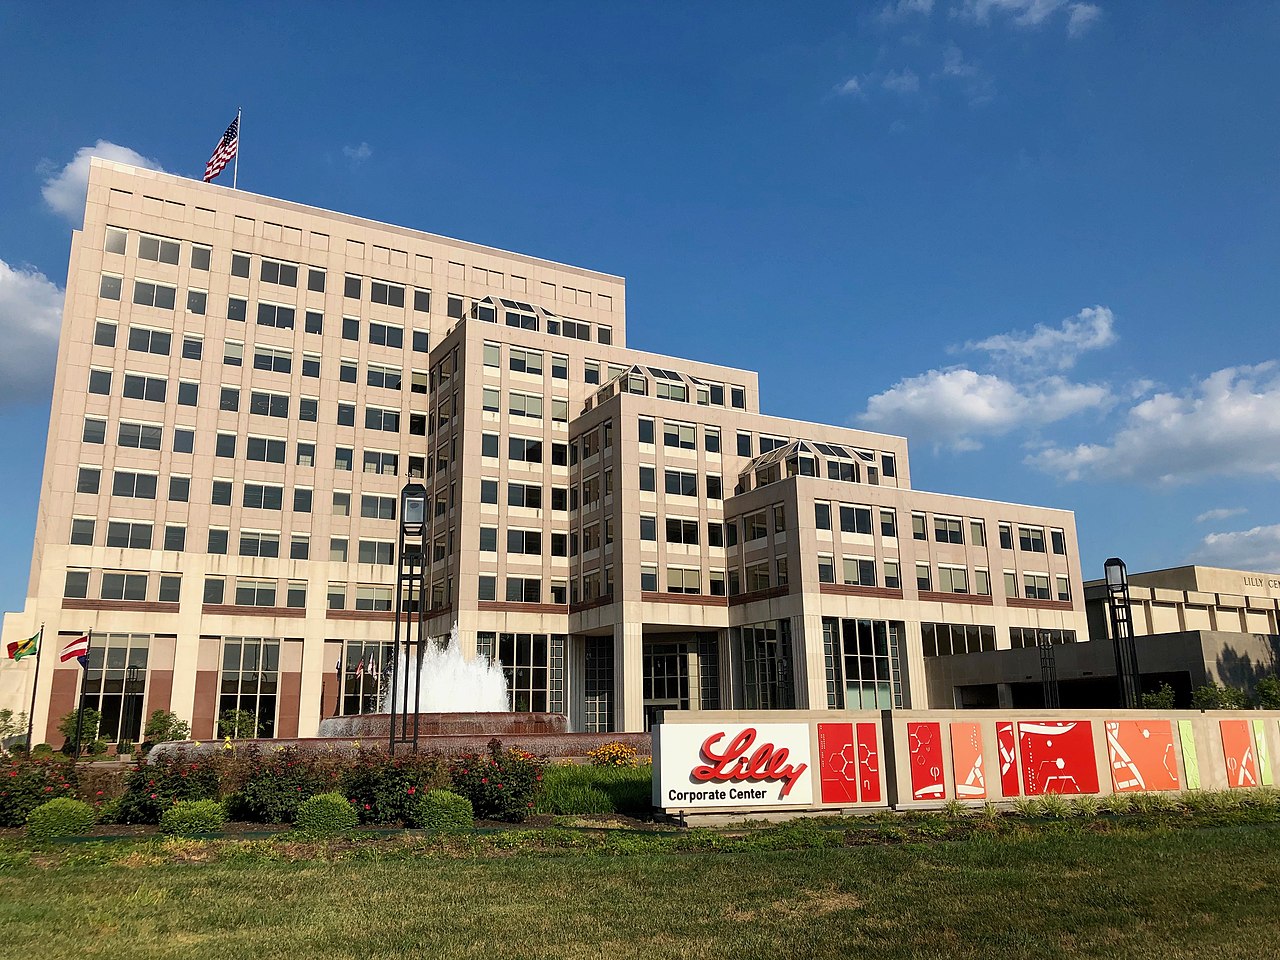 Eli Lilly and Company's Corporate Center in Indianapolis, Indiana. (Credit: Momoneymoproblemz/Wikipedia.)